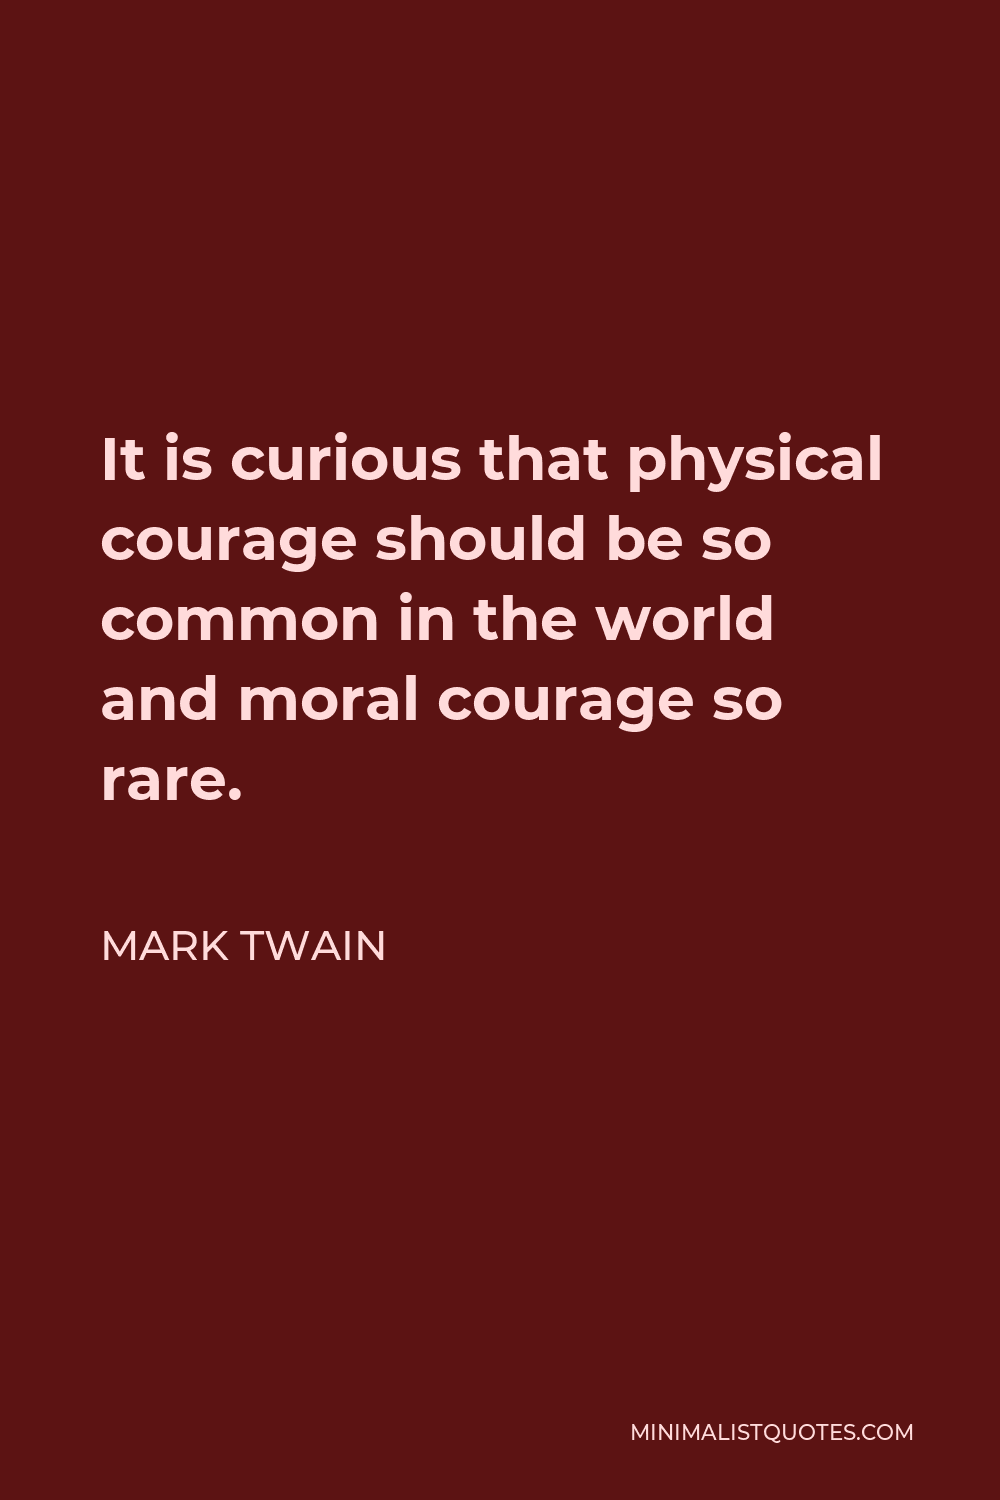 Mark Twain Quote - It is curious that physical courage should be so common in the world and moral courage so rare.